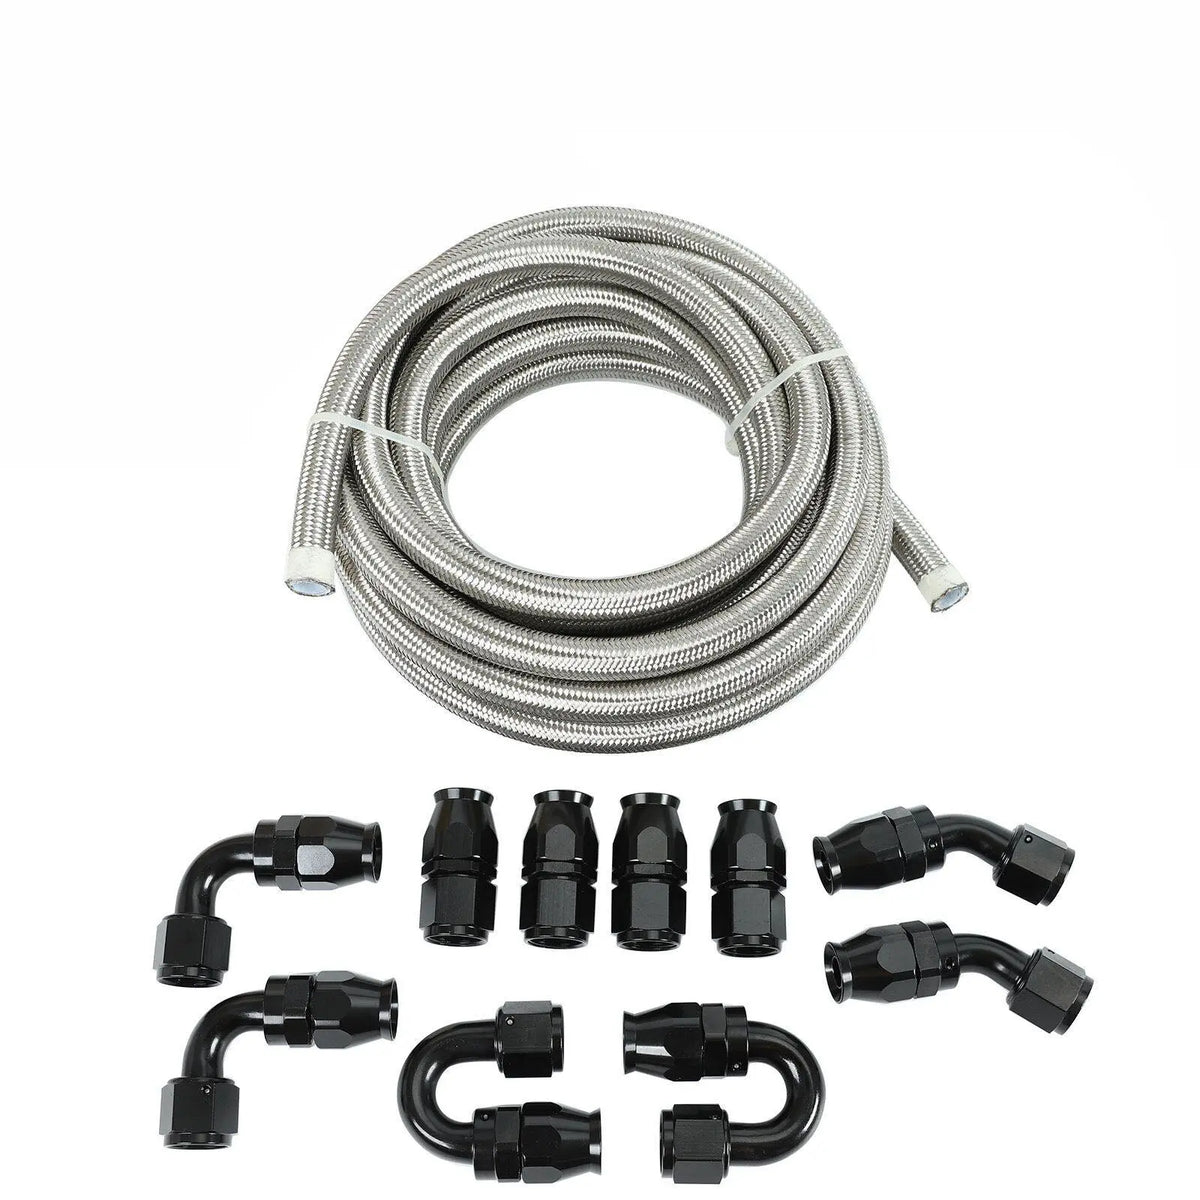 6AN Fuel Line Kit Stainless Steel Nylon Braided 16FT Fuel Line